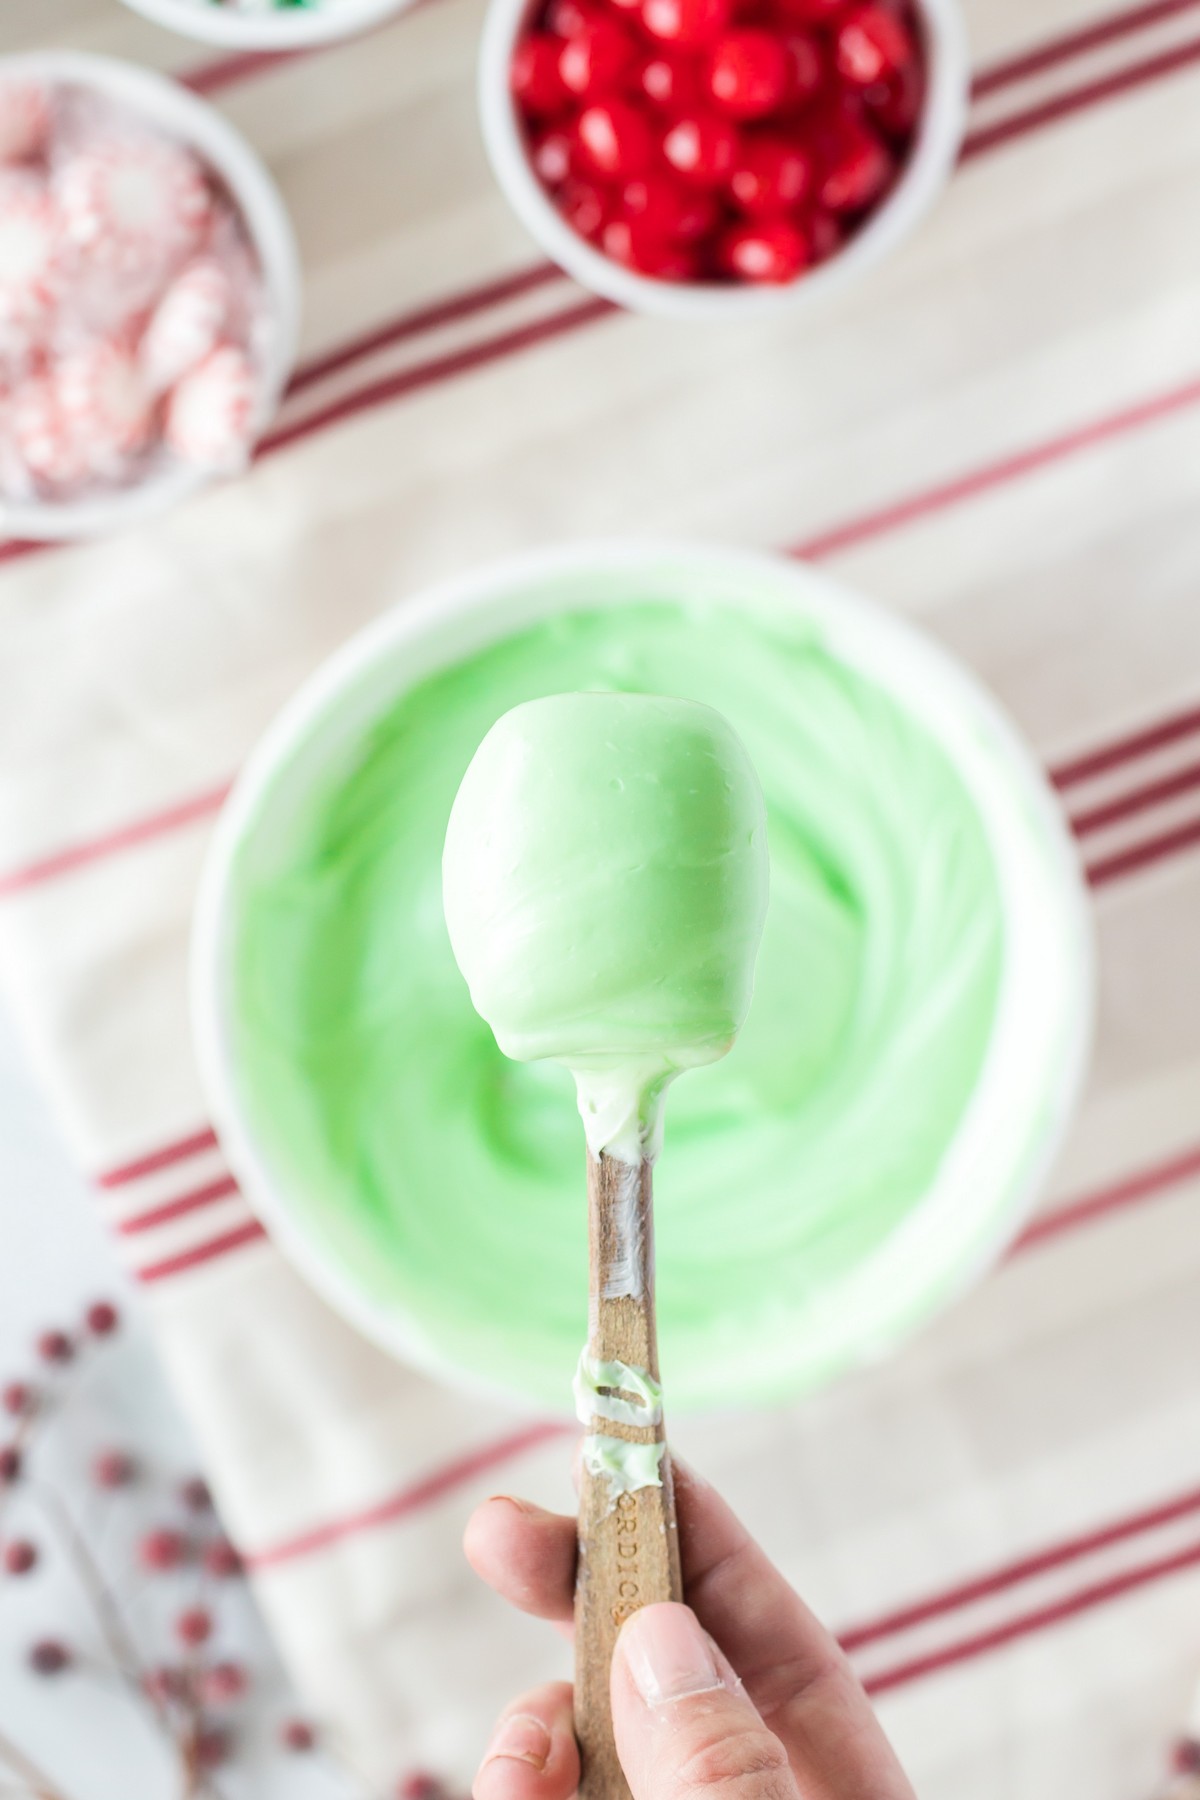 green icing for a chocolate cake